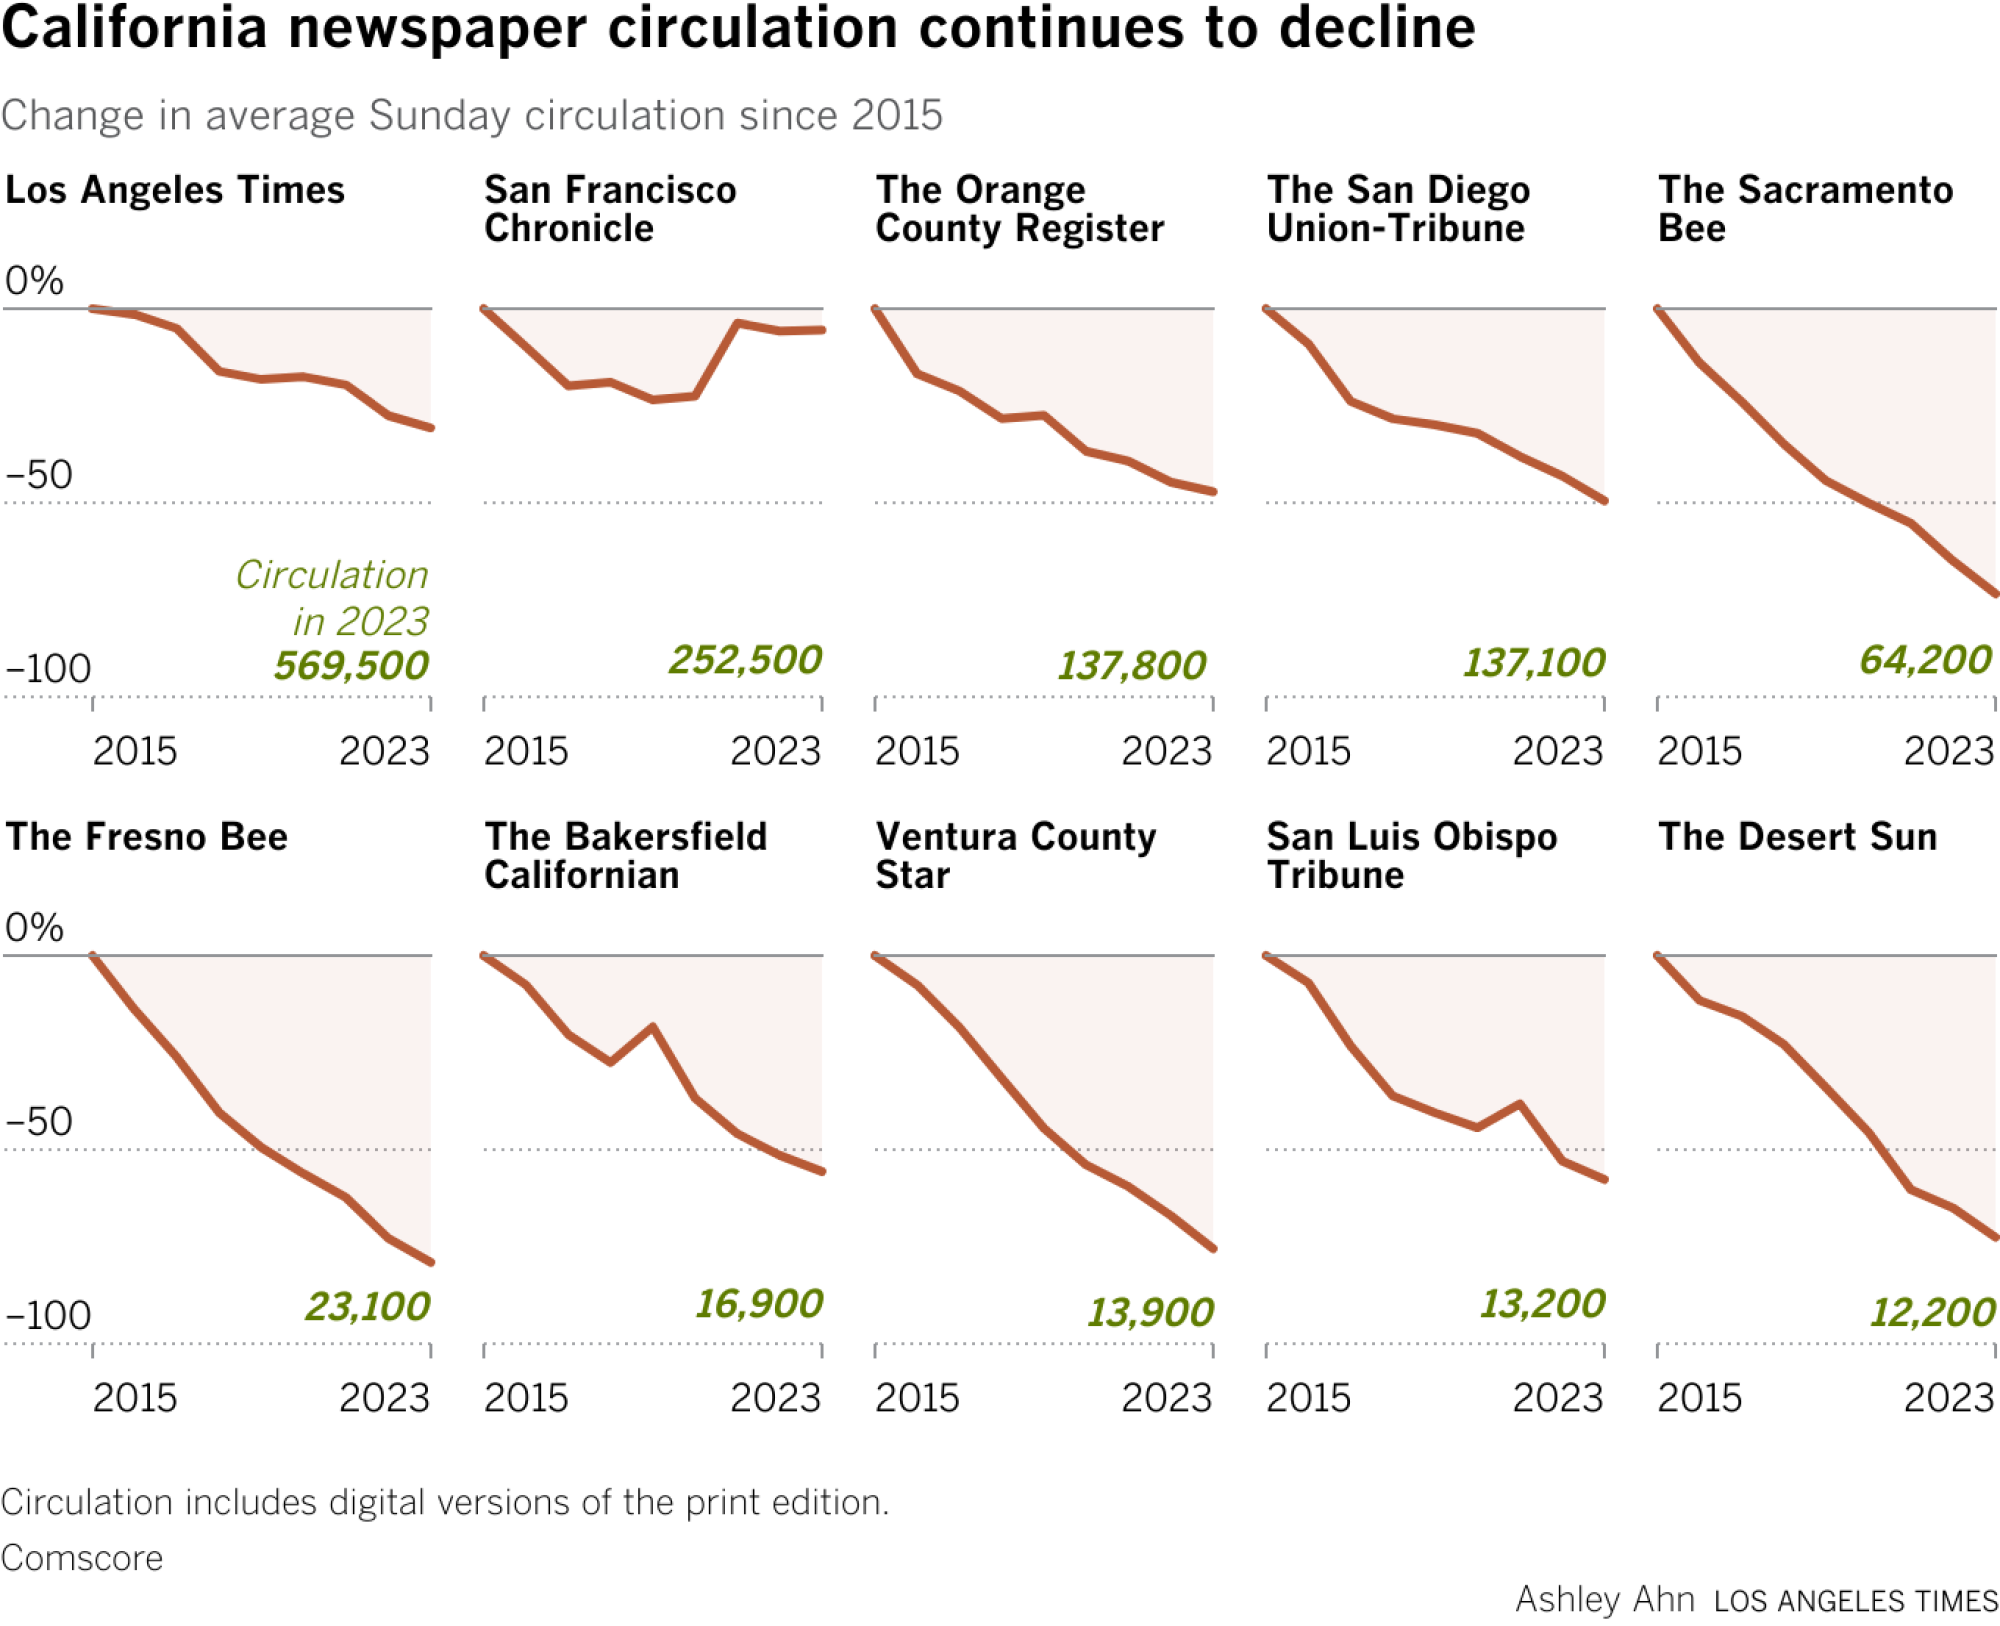 Change in average Sunday circulation since 2015